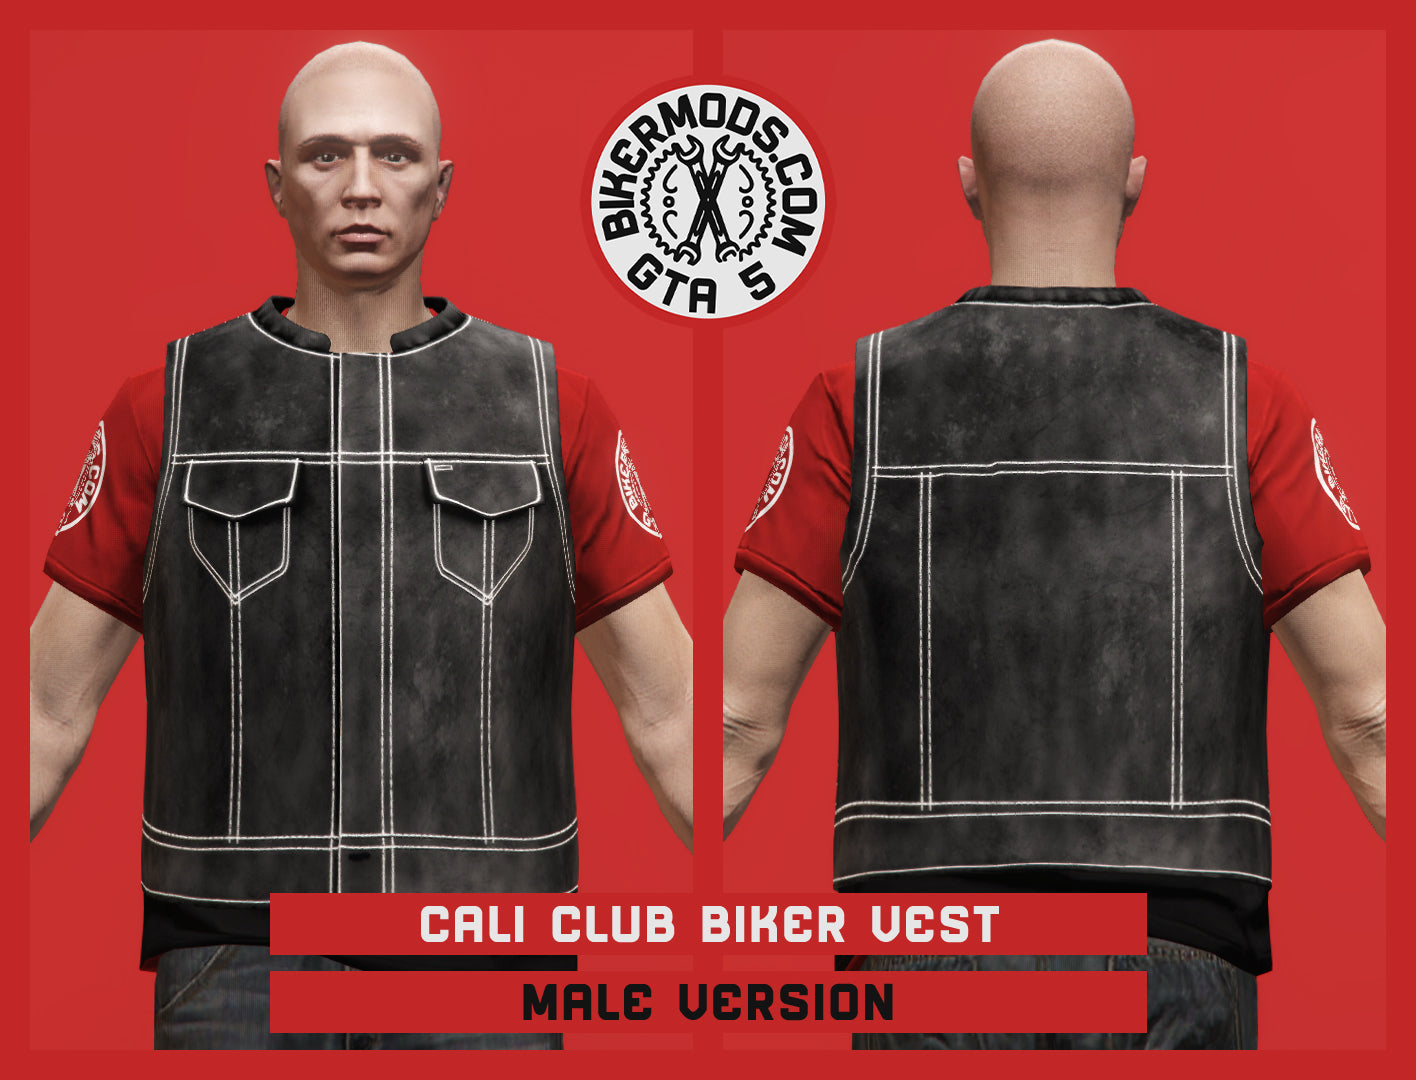 Cali Club Biker Vest (Male) Long and Closed Style